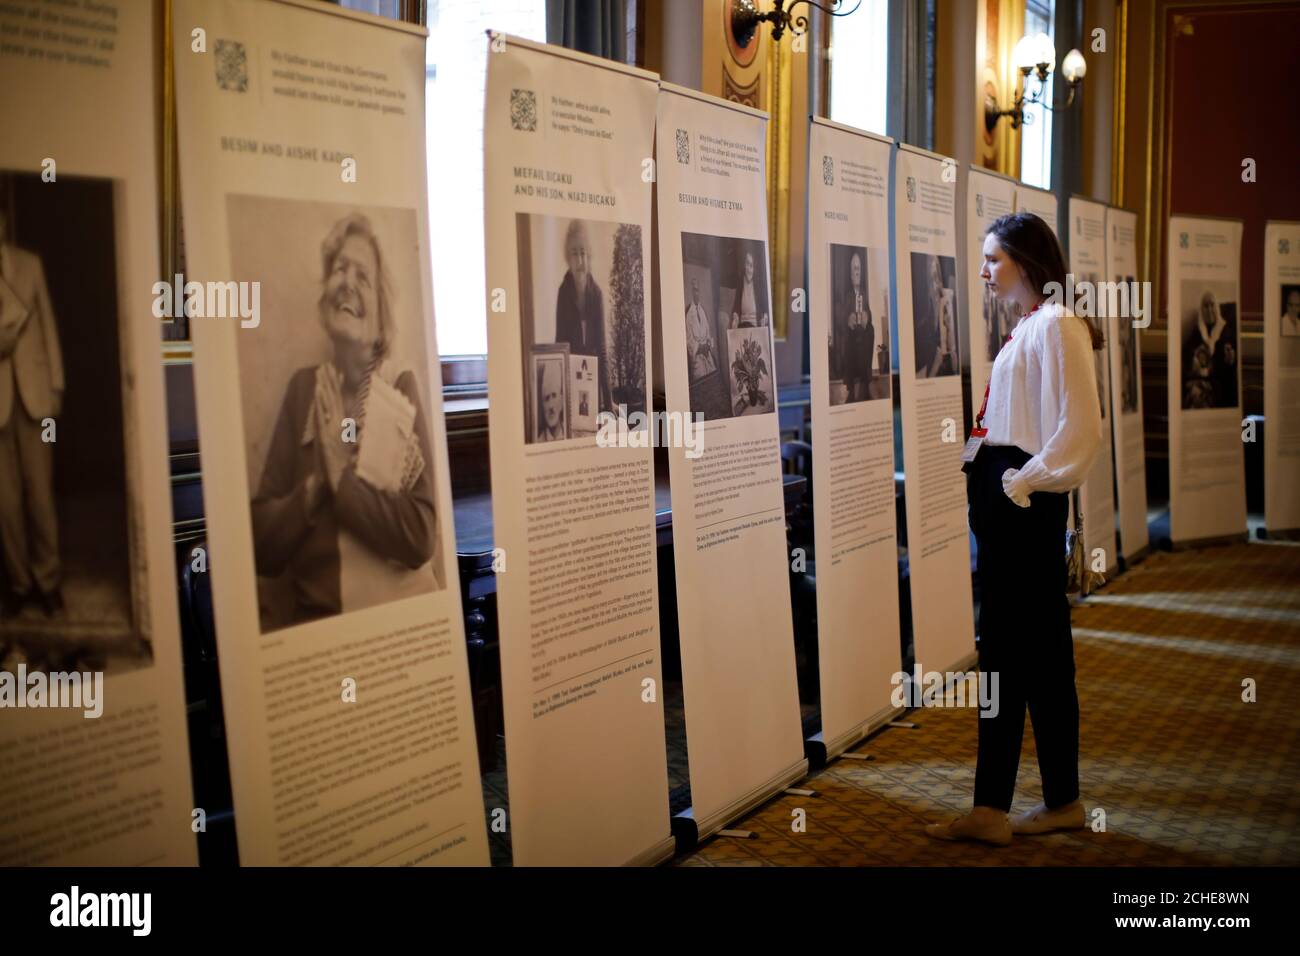 An attendee looks at panels showing life-histories of Holocaust victims at the annual Holocaust Memorial Day Commemoration event at the Foreign & Commonwealth Office, London. Stock Photo